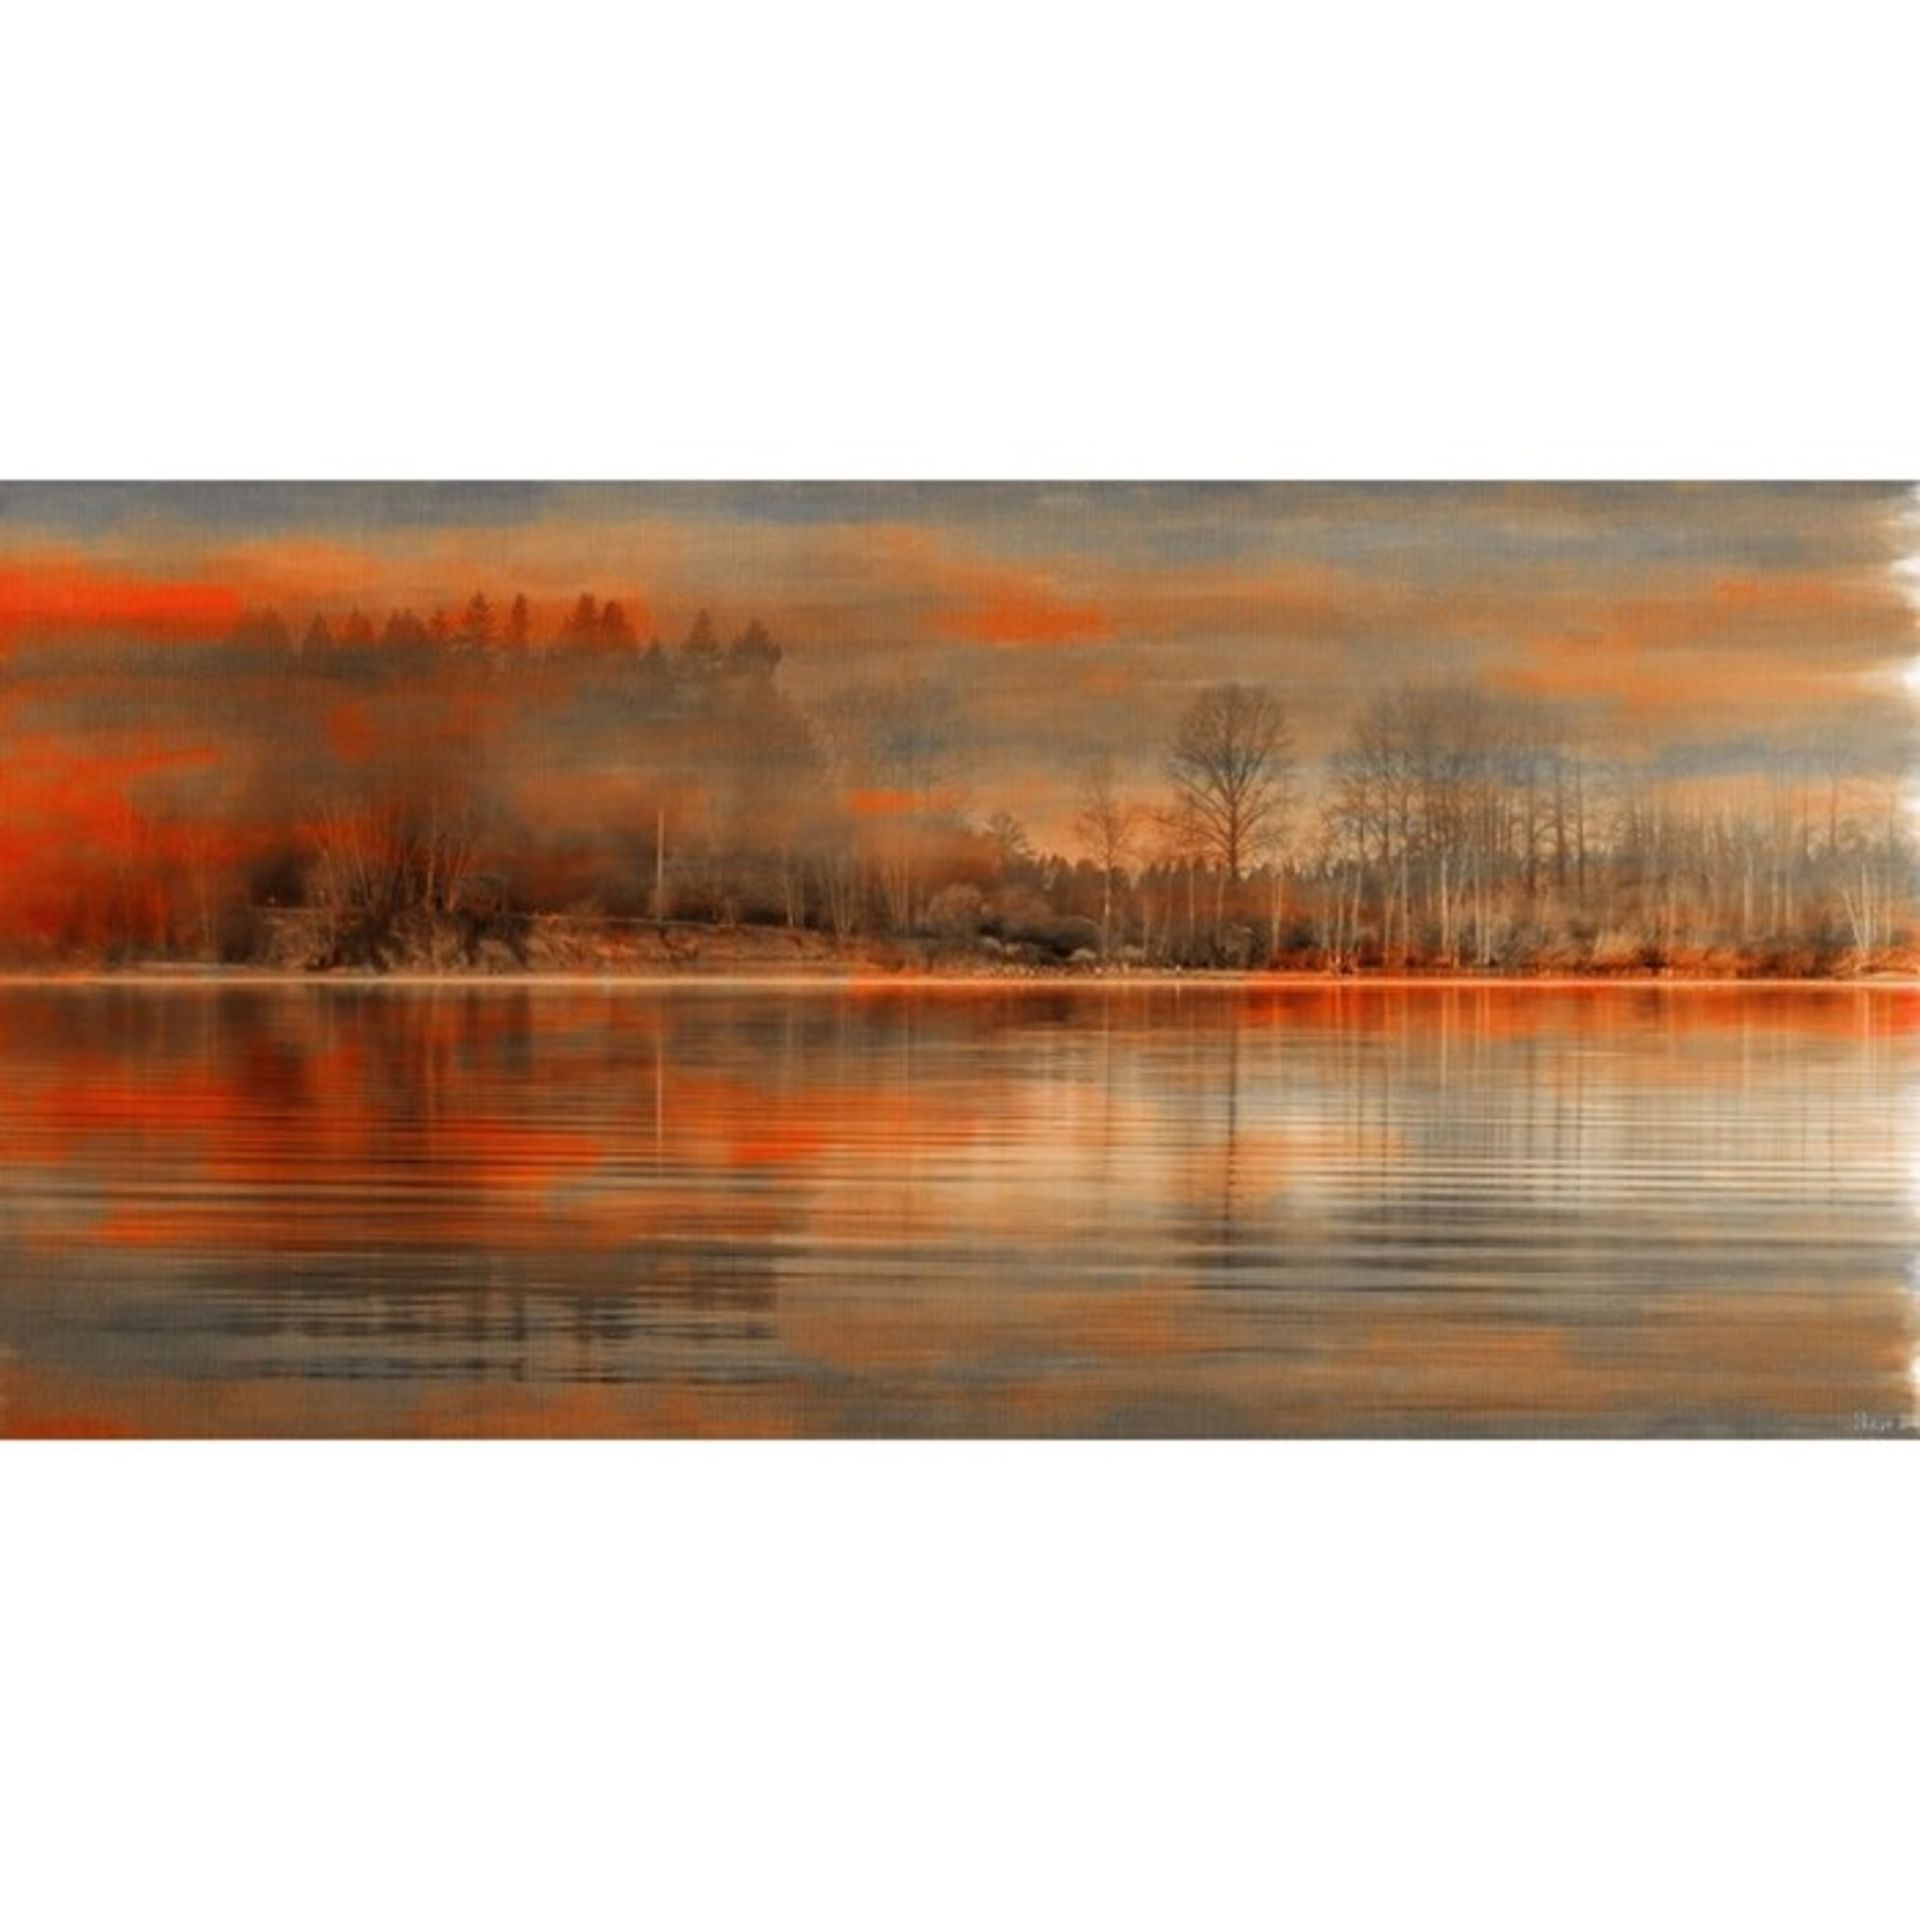 East Urban Home,'Serenity' by East Urban Home Framed Graphic Art Print on Wrapped CanvasRRP -£135.99